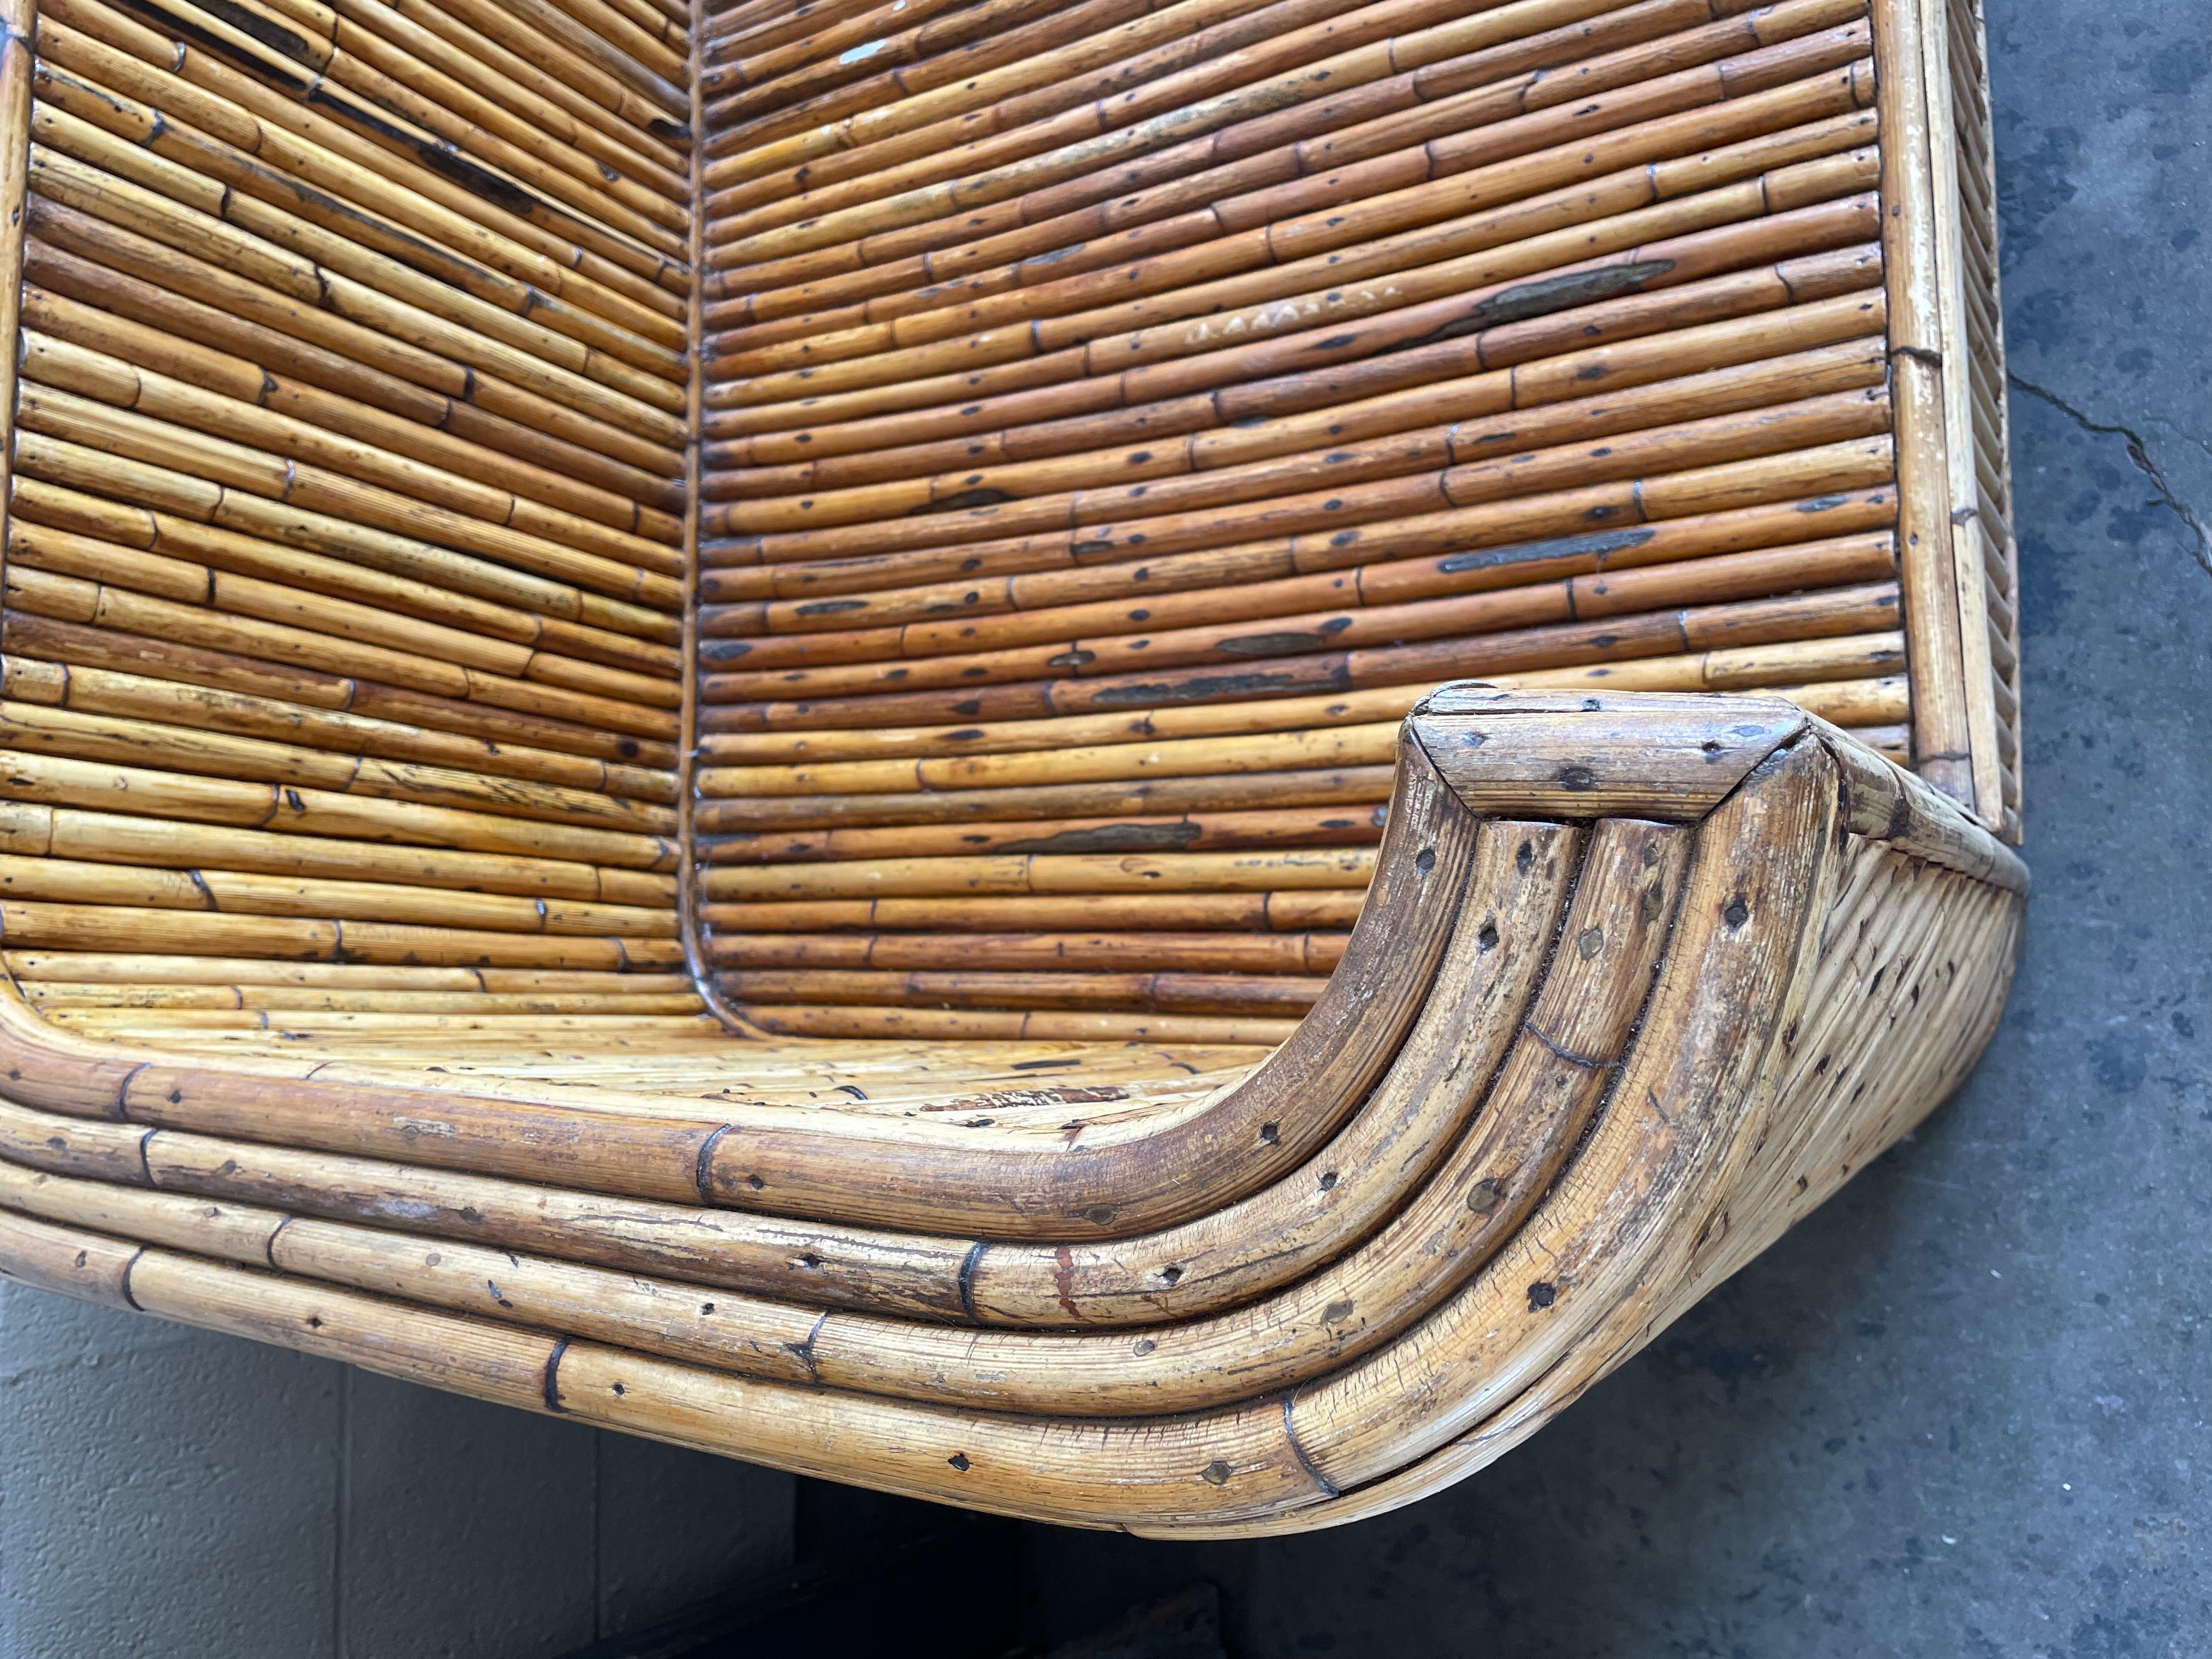 One of a kind split reed bamboo sofa that will make a statement in any home!


Measures: 81